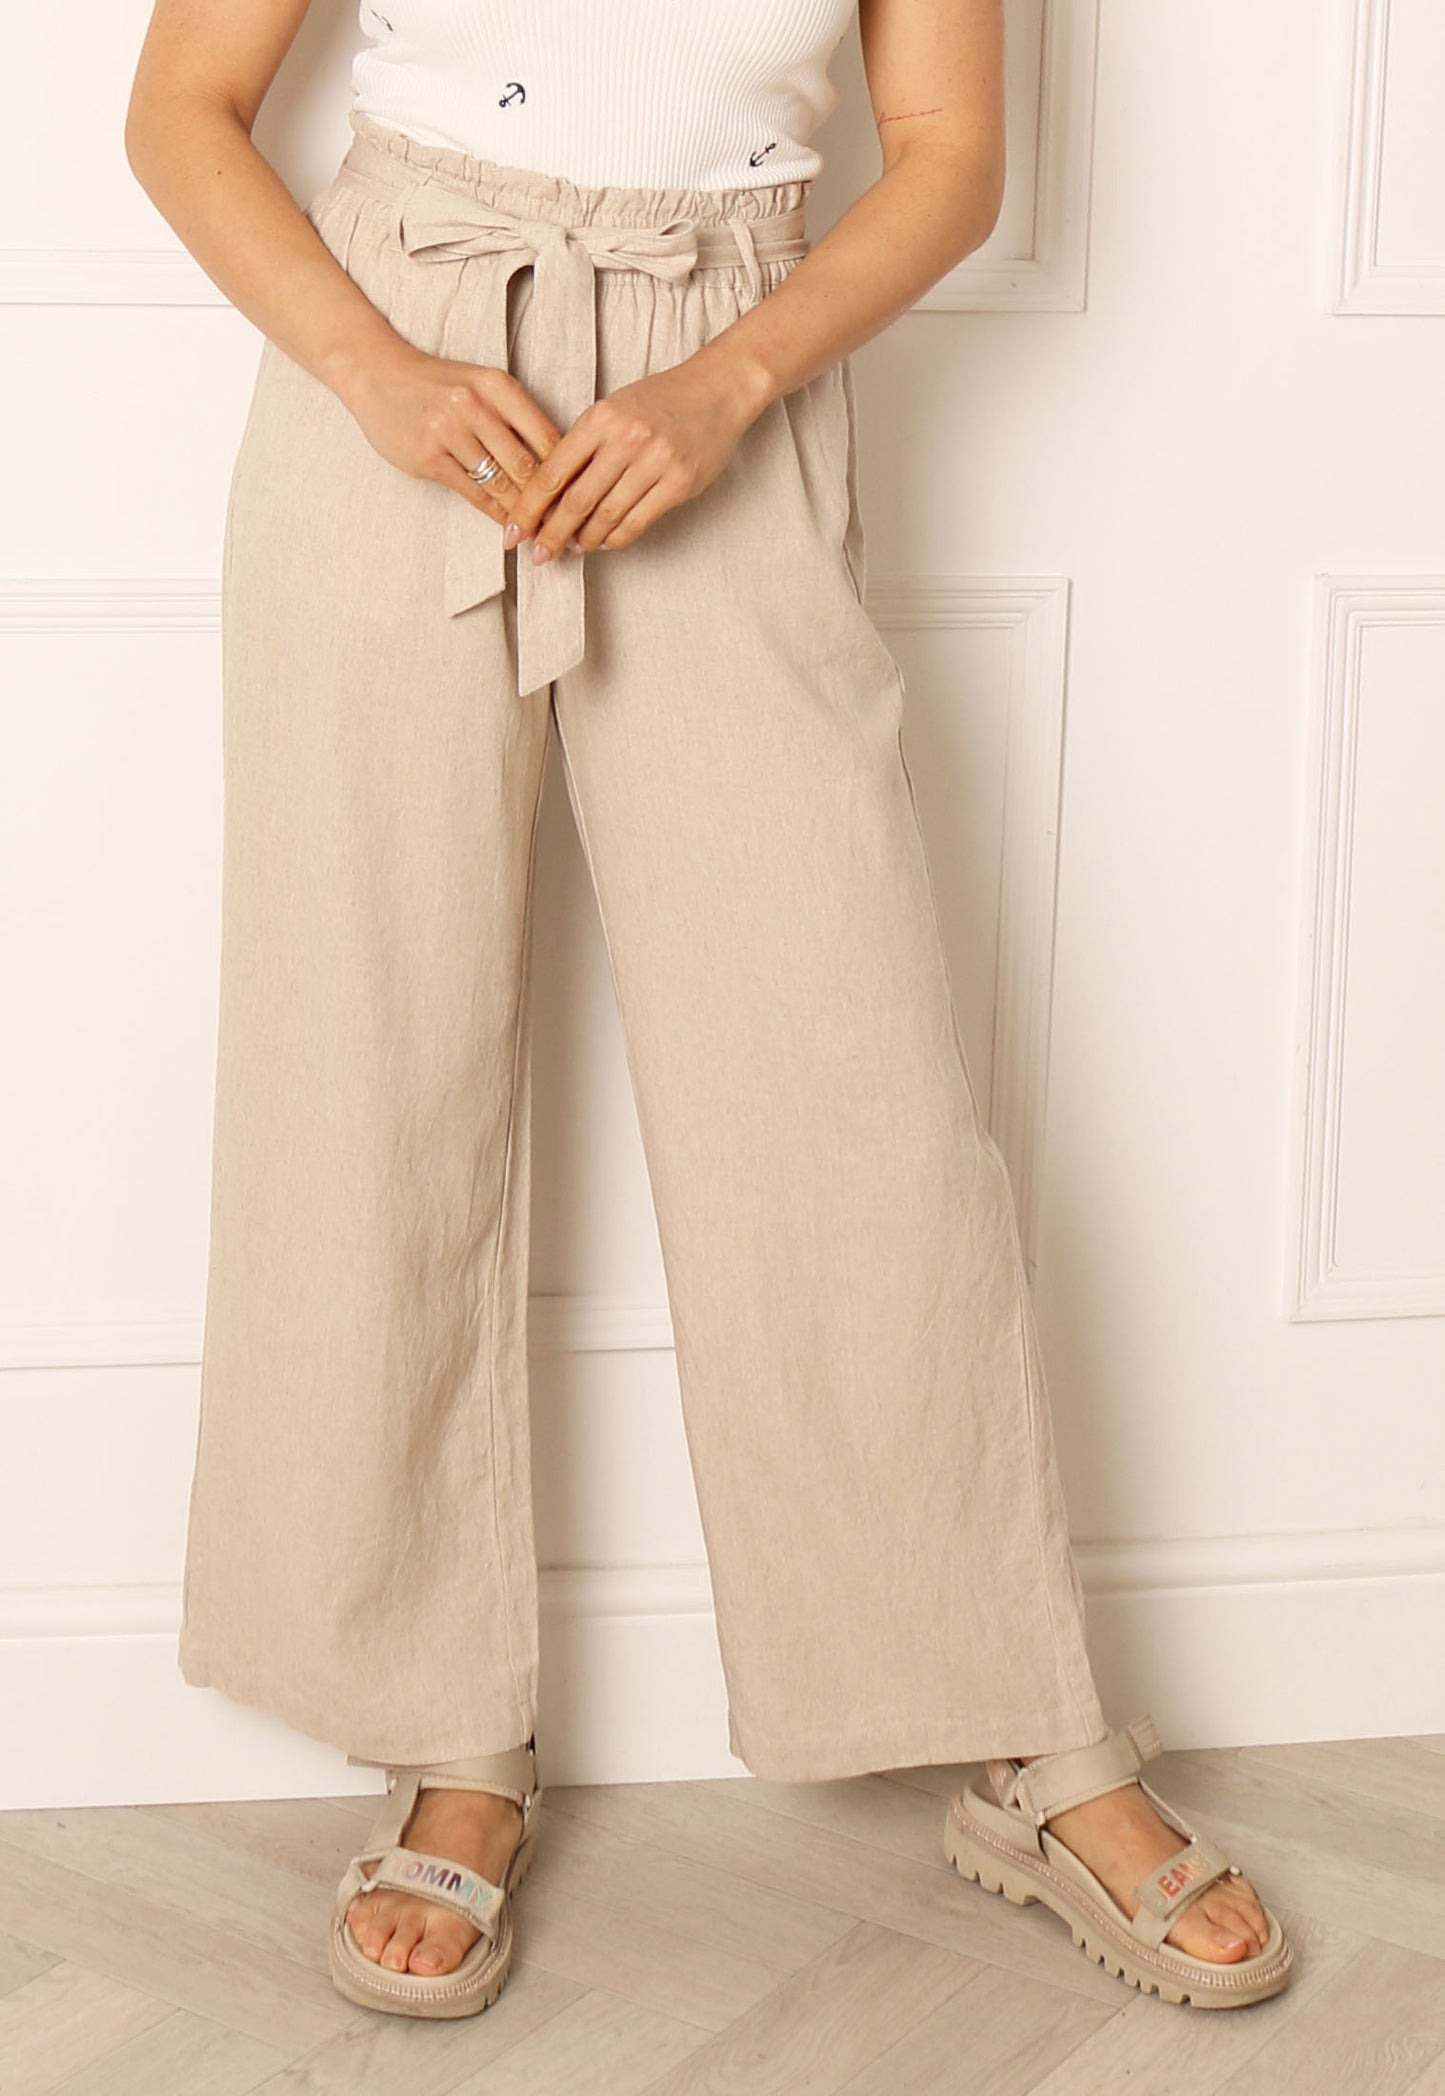 JDY Say High Waisted Wide Leg Linen Trousers with Belt in Beige - concretebartops